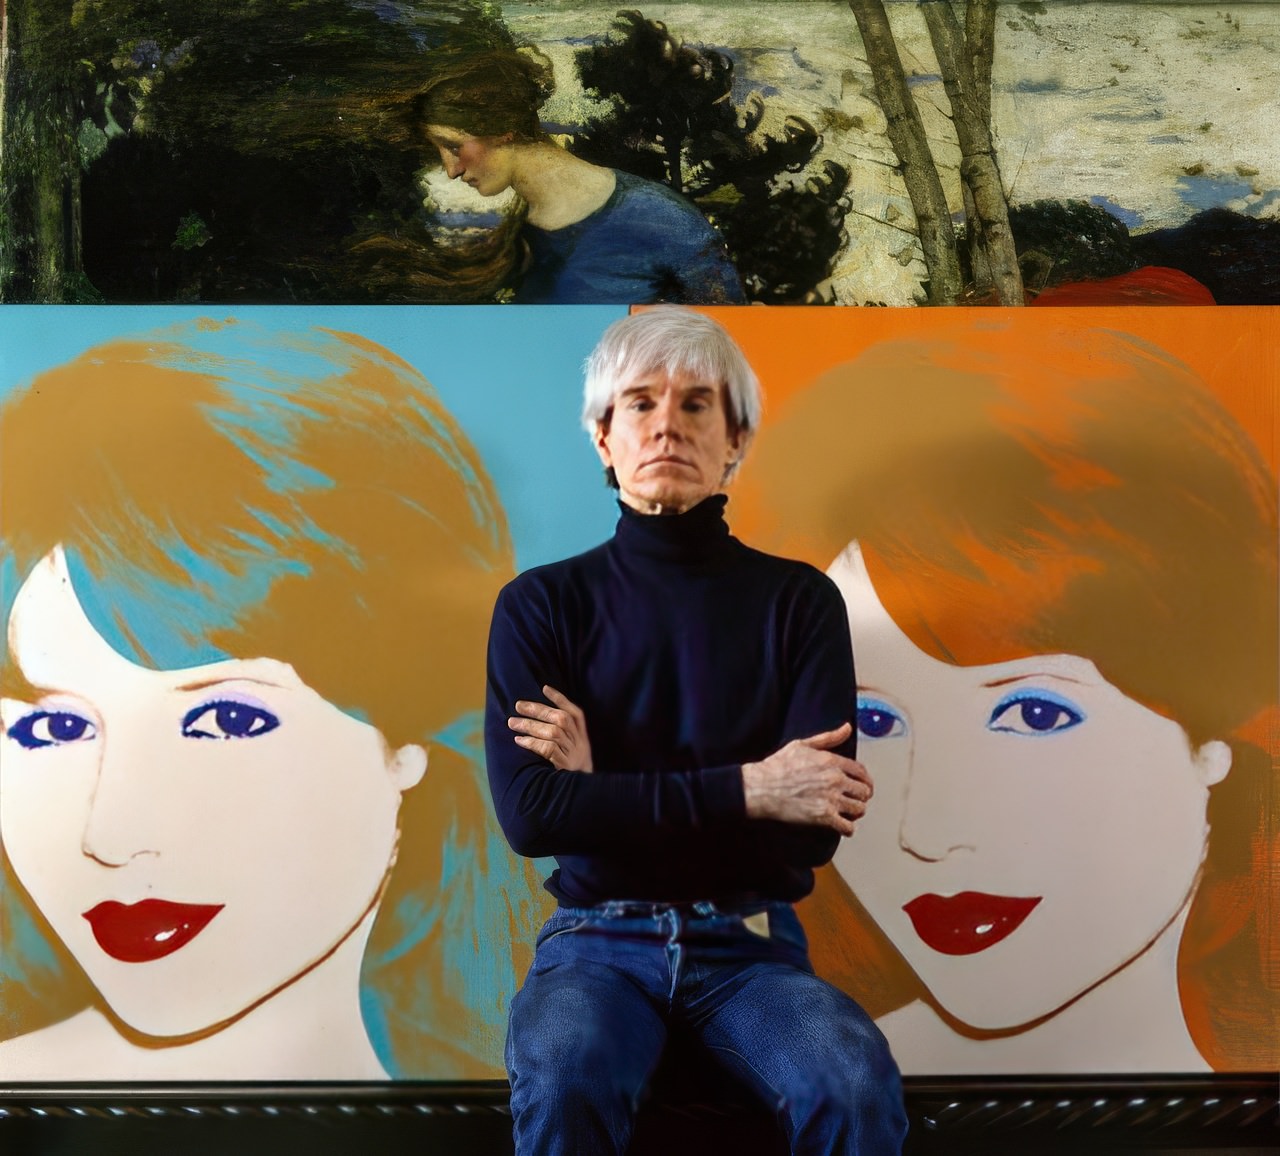 Andy Warhol and Pia Zadora's Iconic 1983 Photoshoot at The Factory